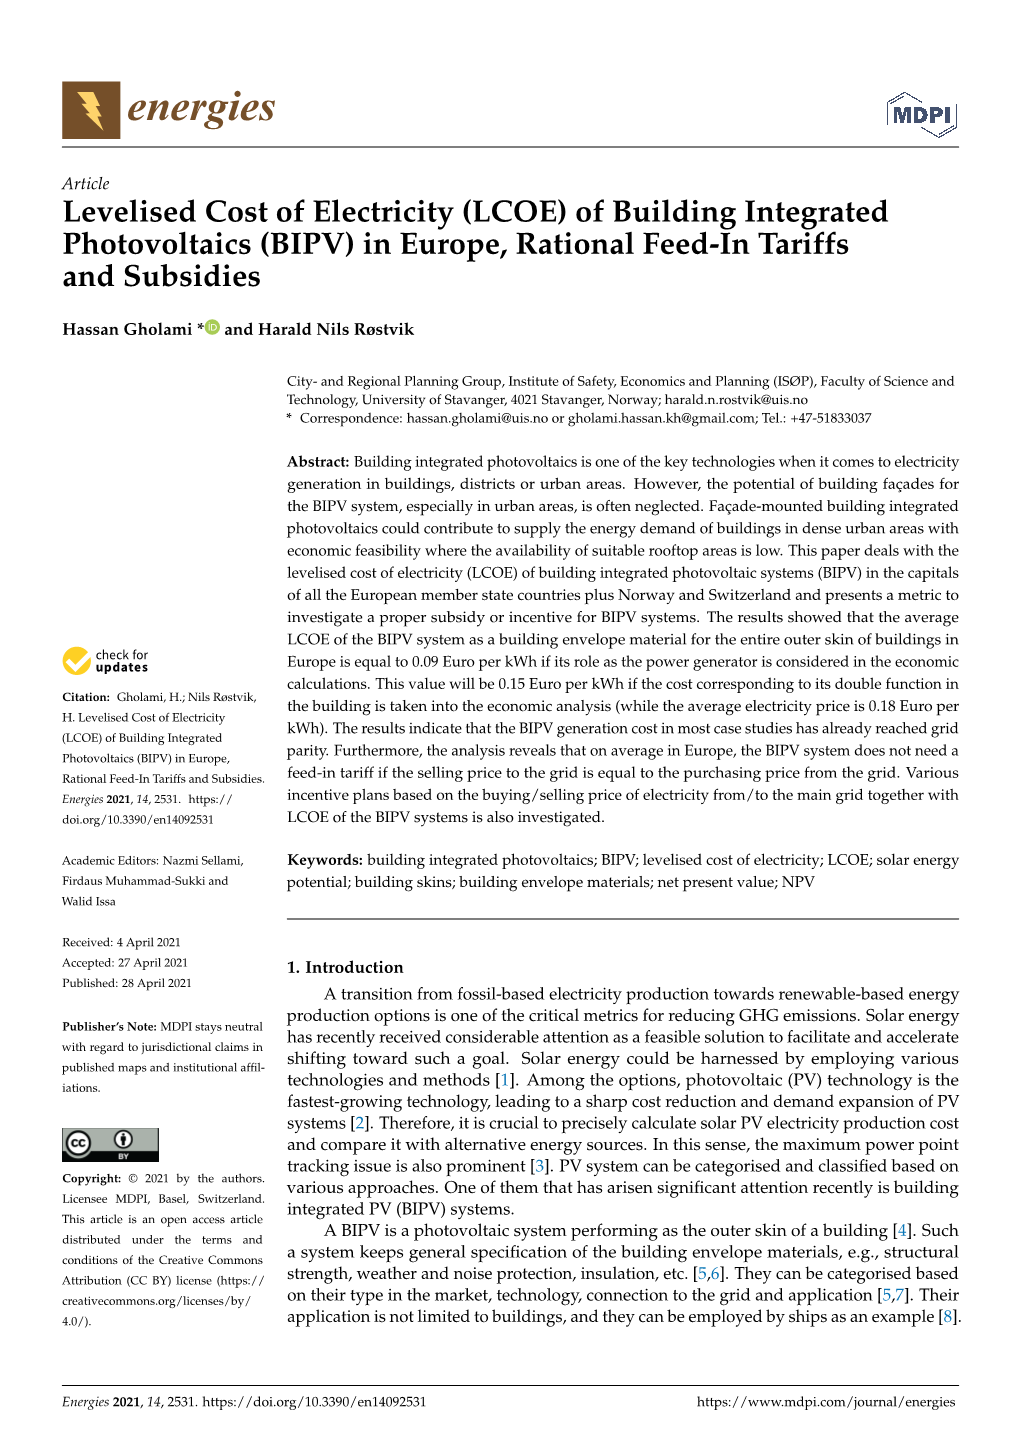 Levelised Cost of Electricity (LCOE) of Building Integrated Photovoltaics (BIPV) in Europe, Rational Feed-In Tariffsand Subsidie